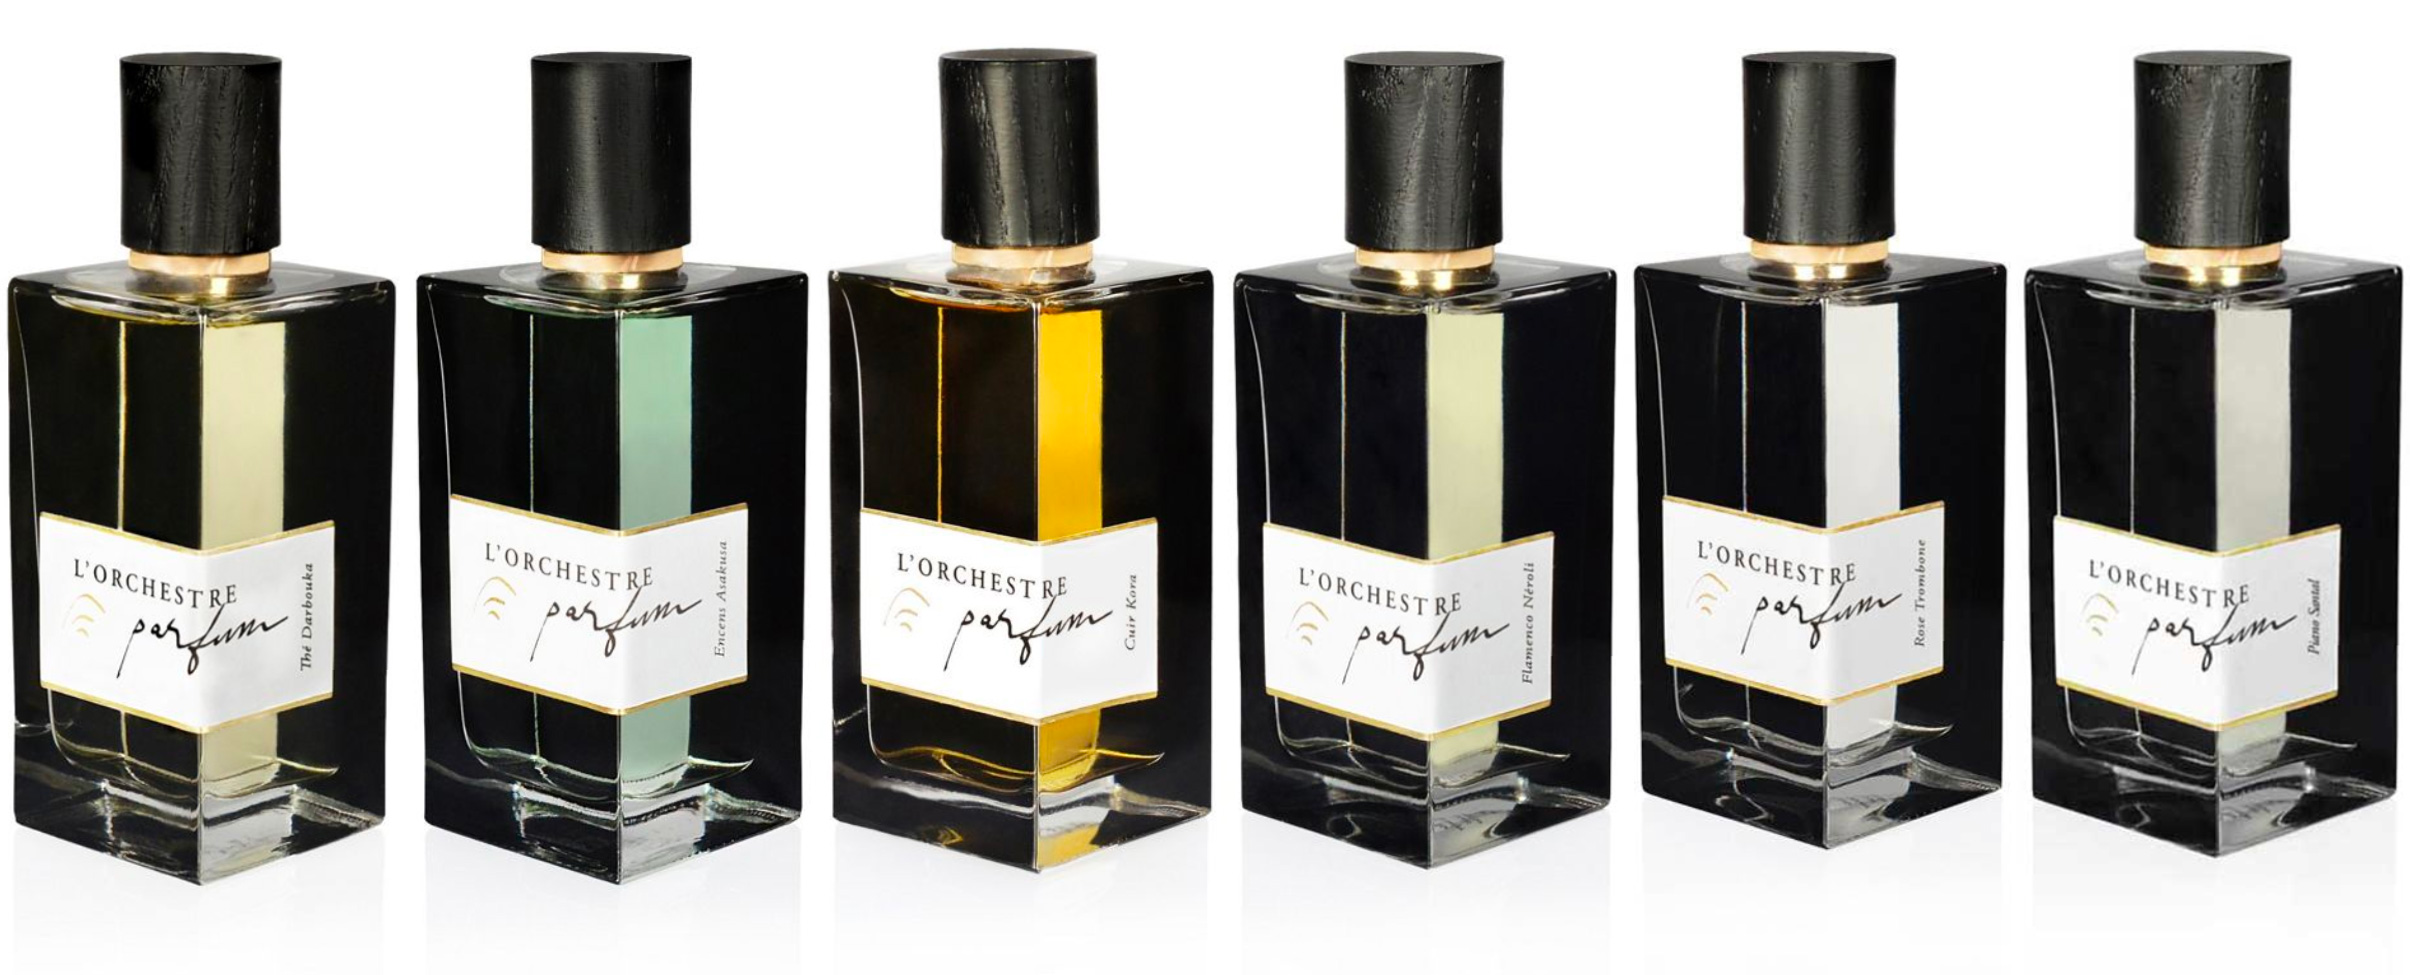 L’ORCHESTRE PARFUM: Music in Perfumes ~ Fragrance Reviews